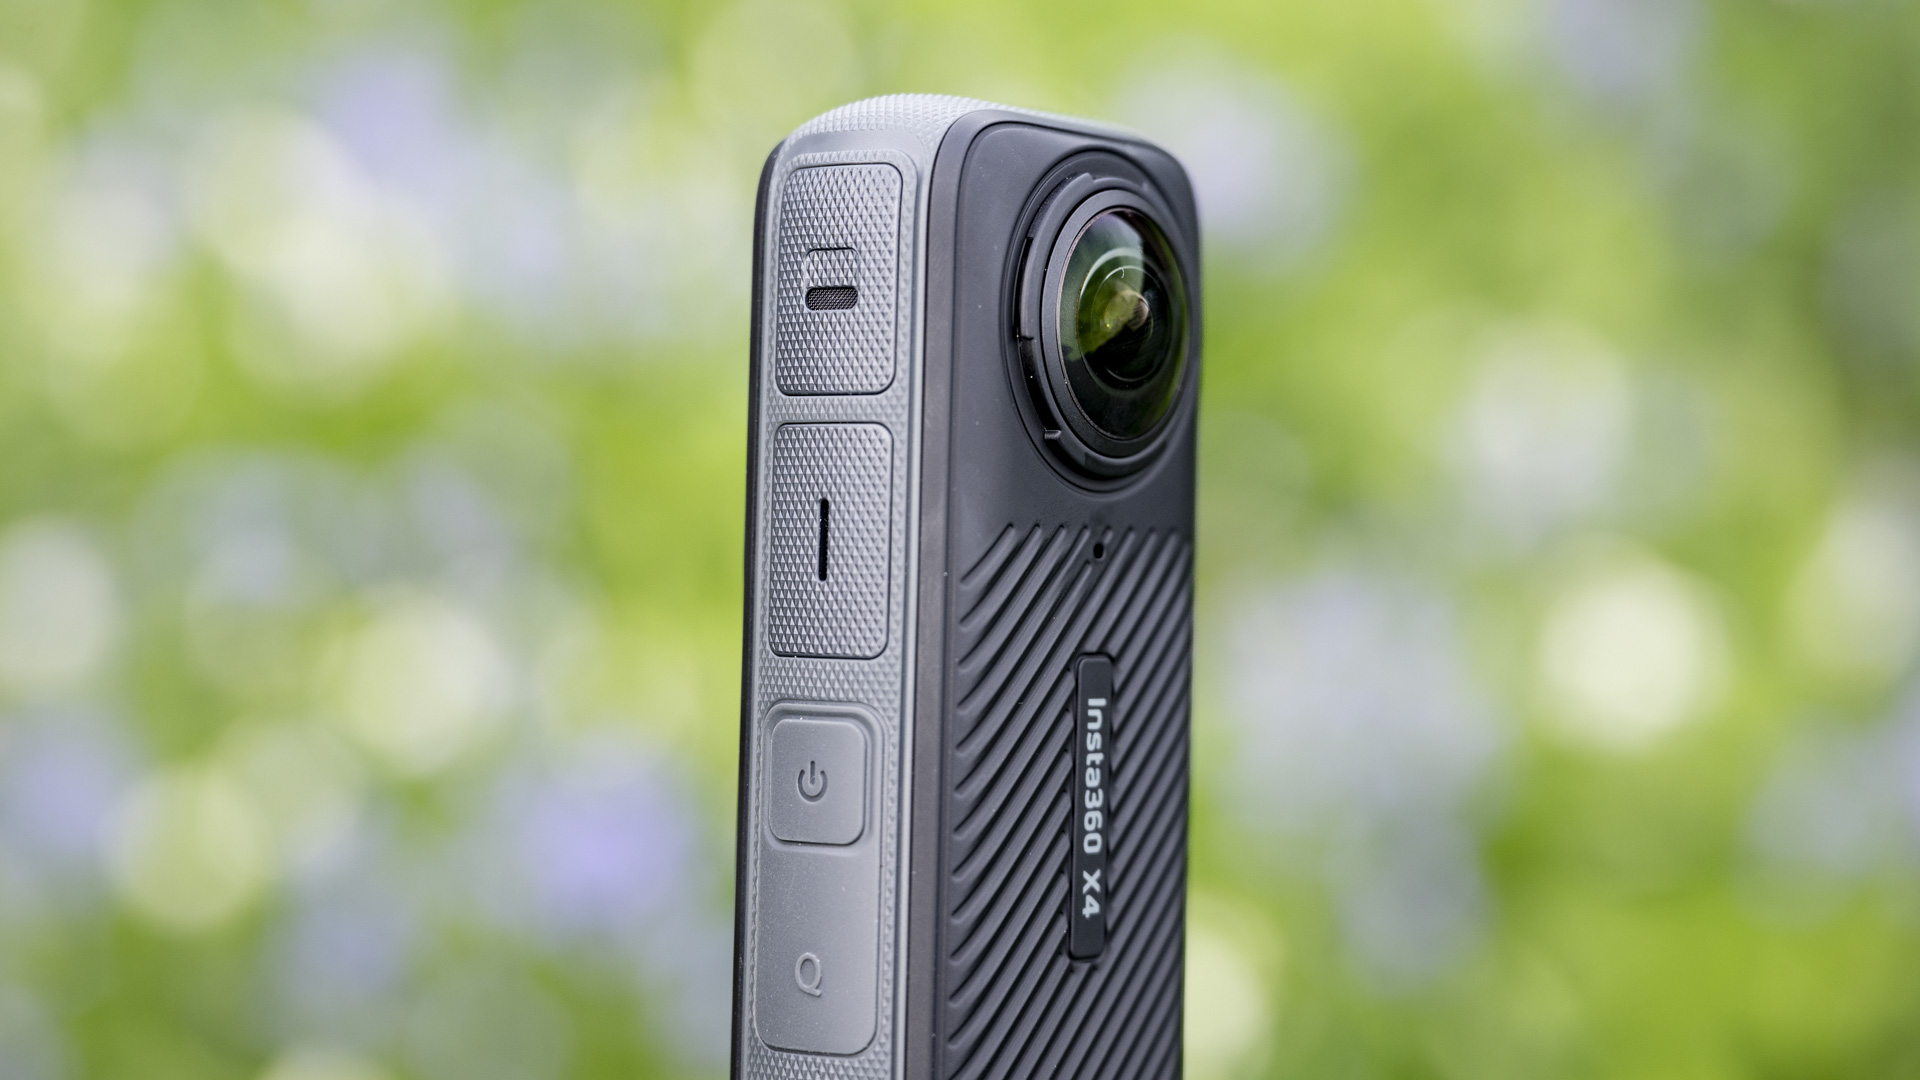 Side view of the Insta360 X4 360 degree camera outdoors with vibrant grassy background